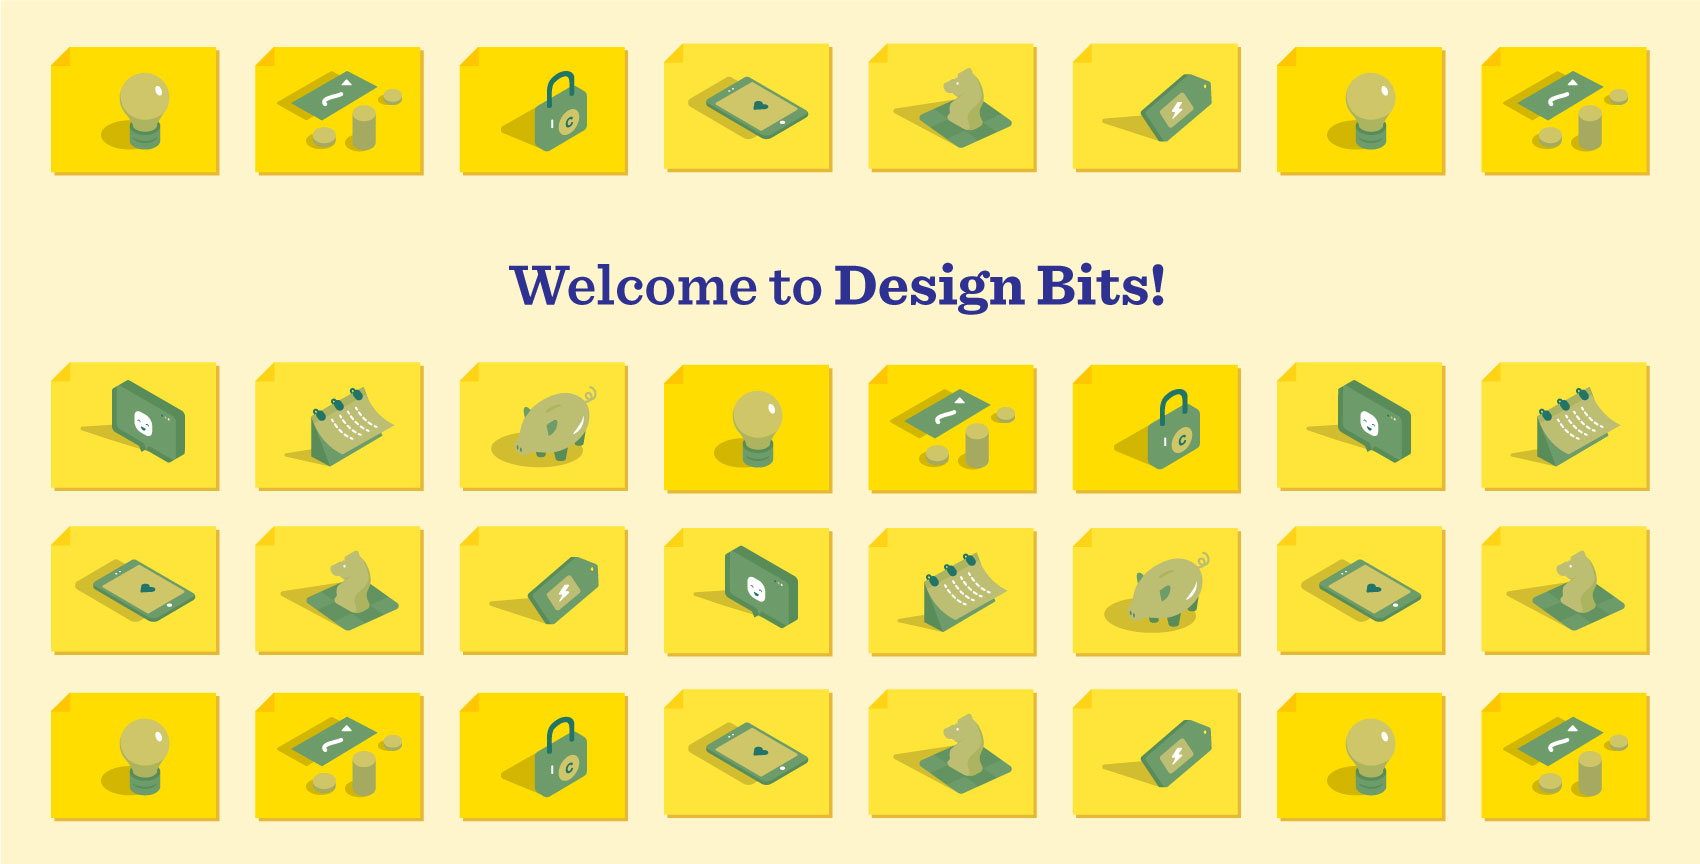 Welcome to Design Bits